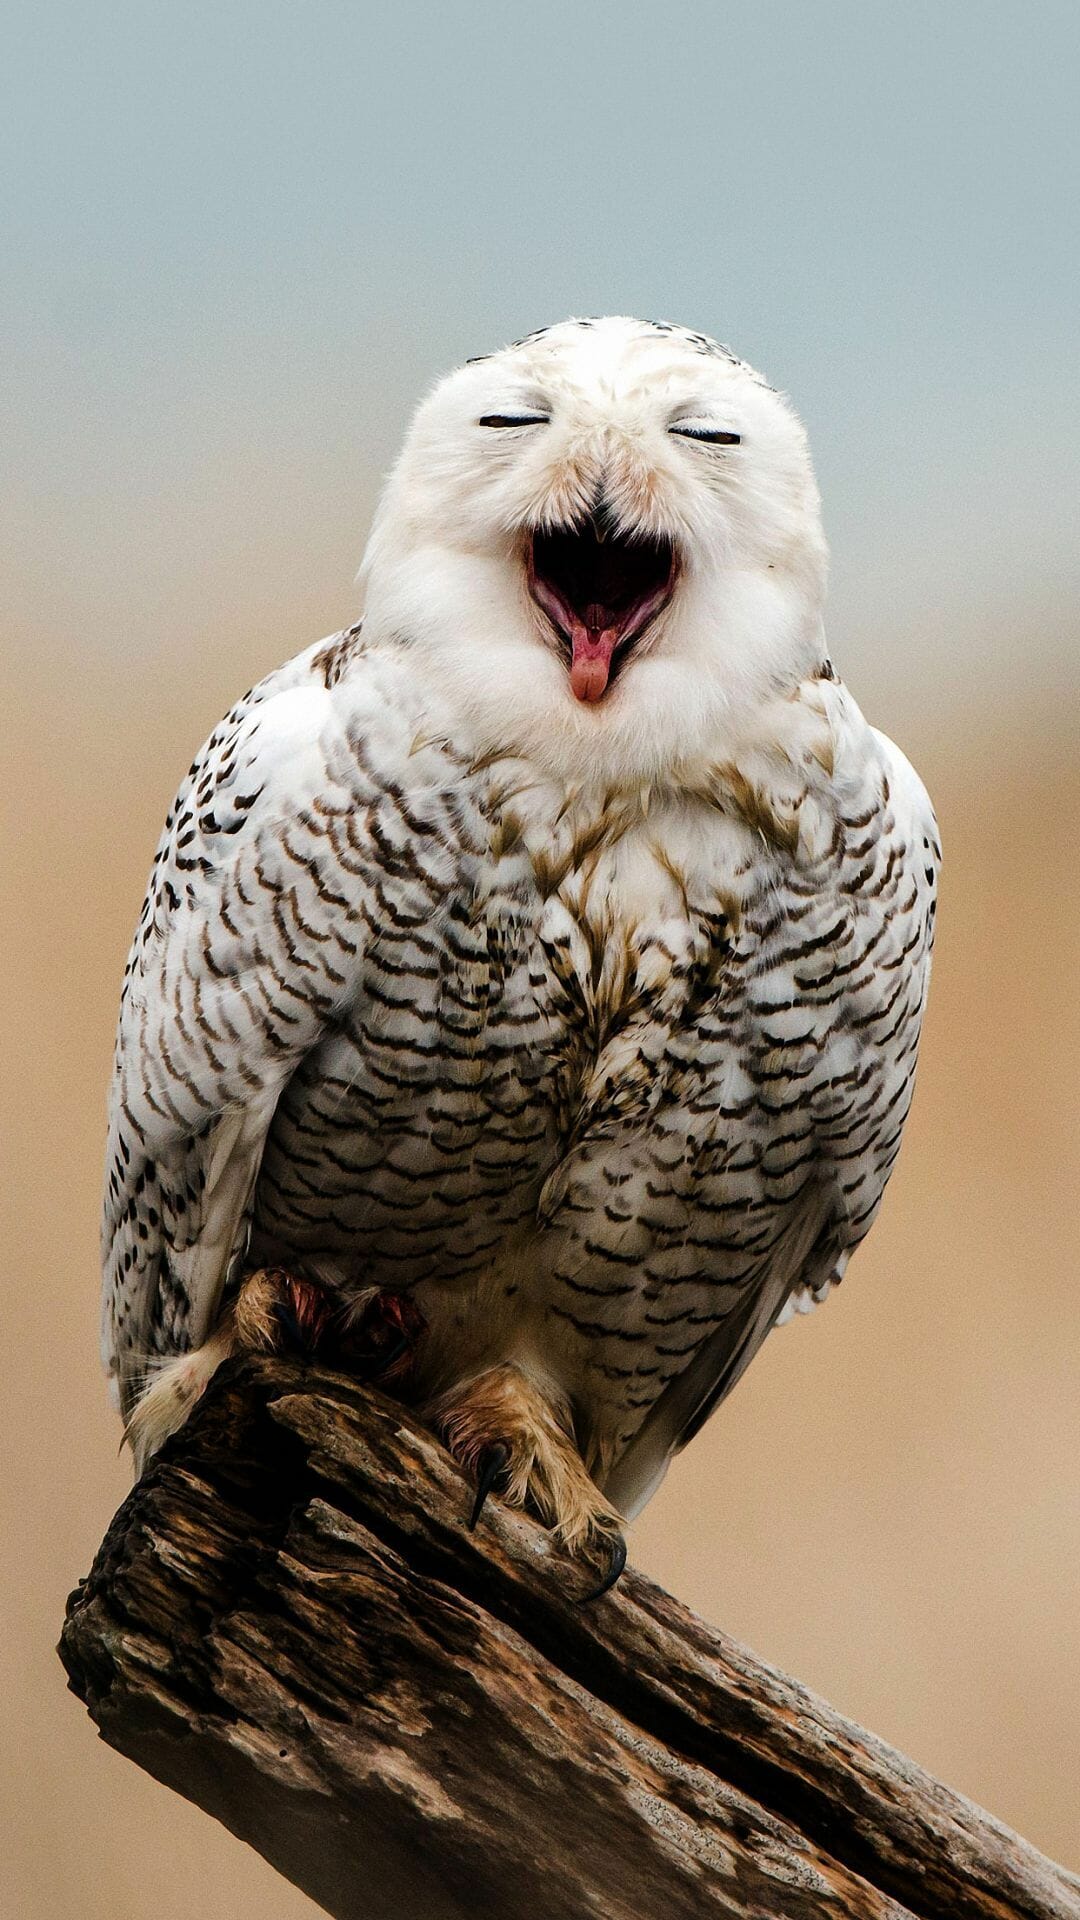 White Owl Wallpapers